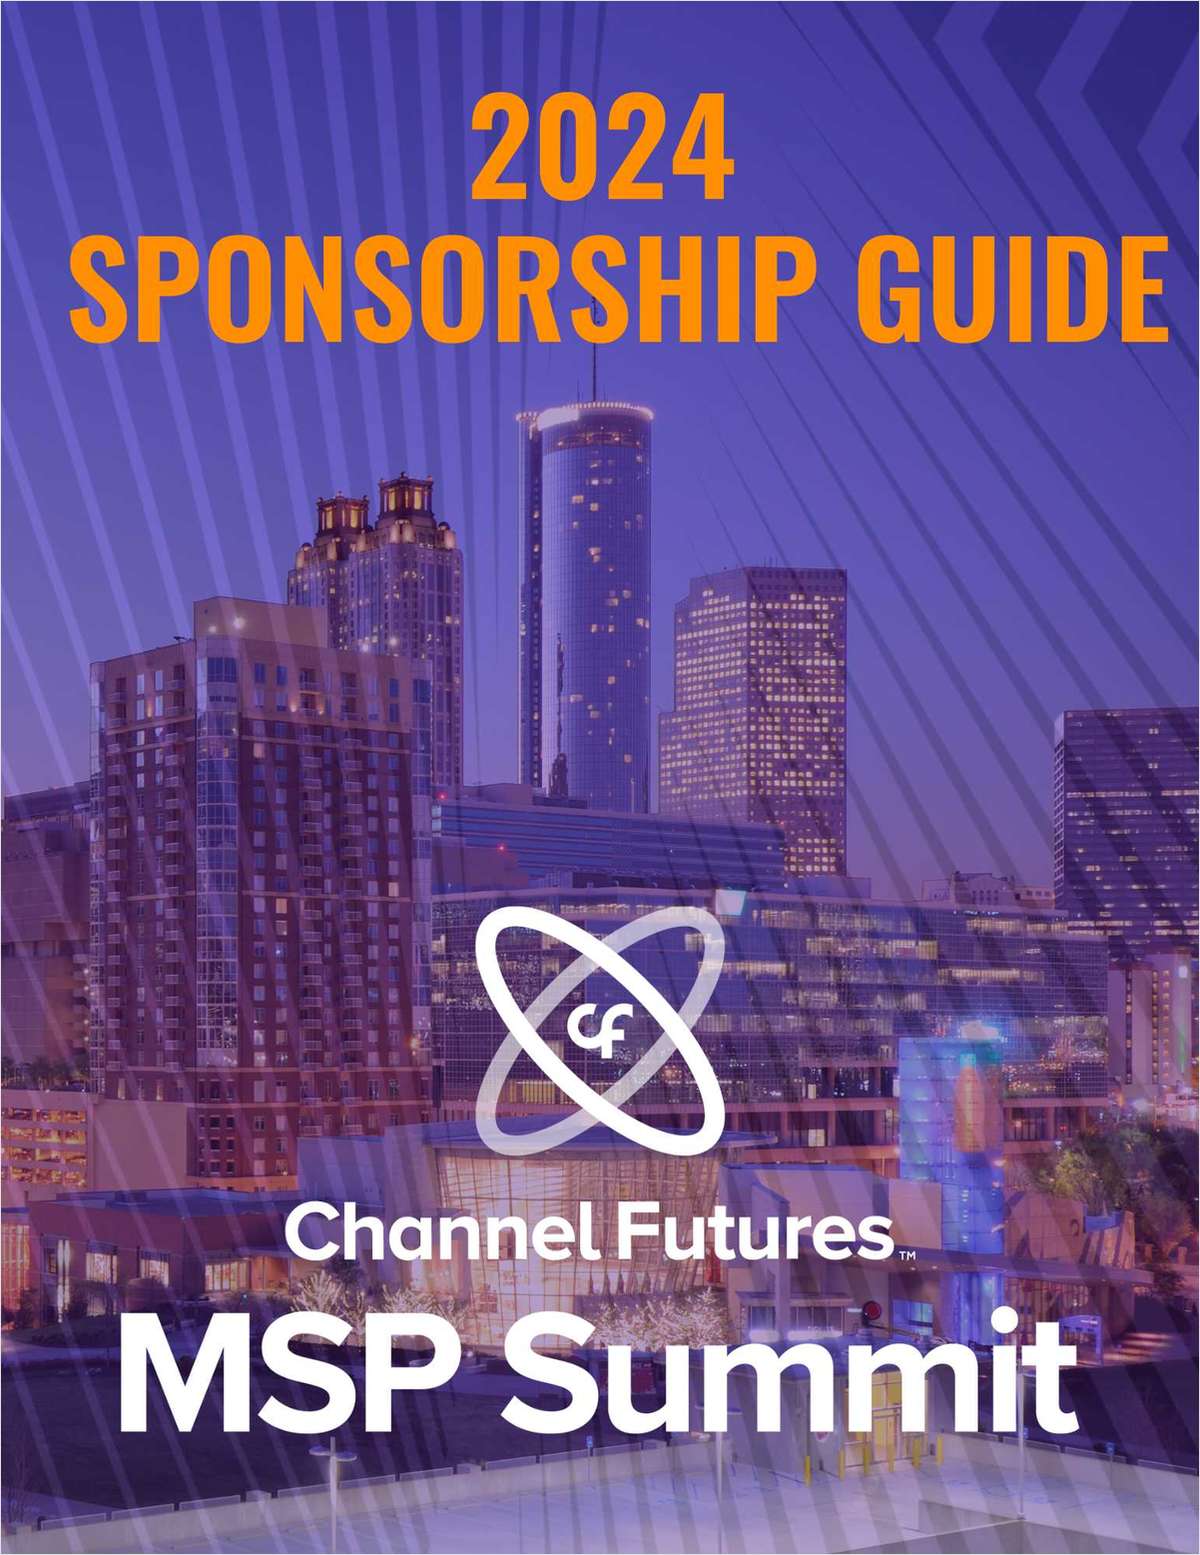 Sponsor & Exhibit at the #1 IT Channel Event- MSP Summit